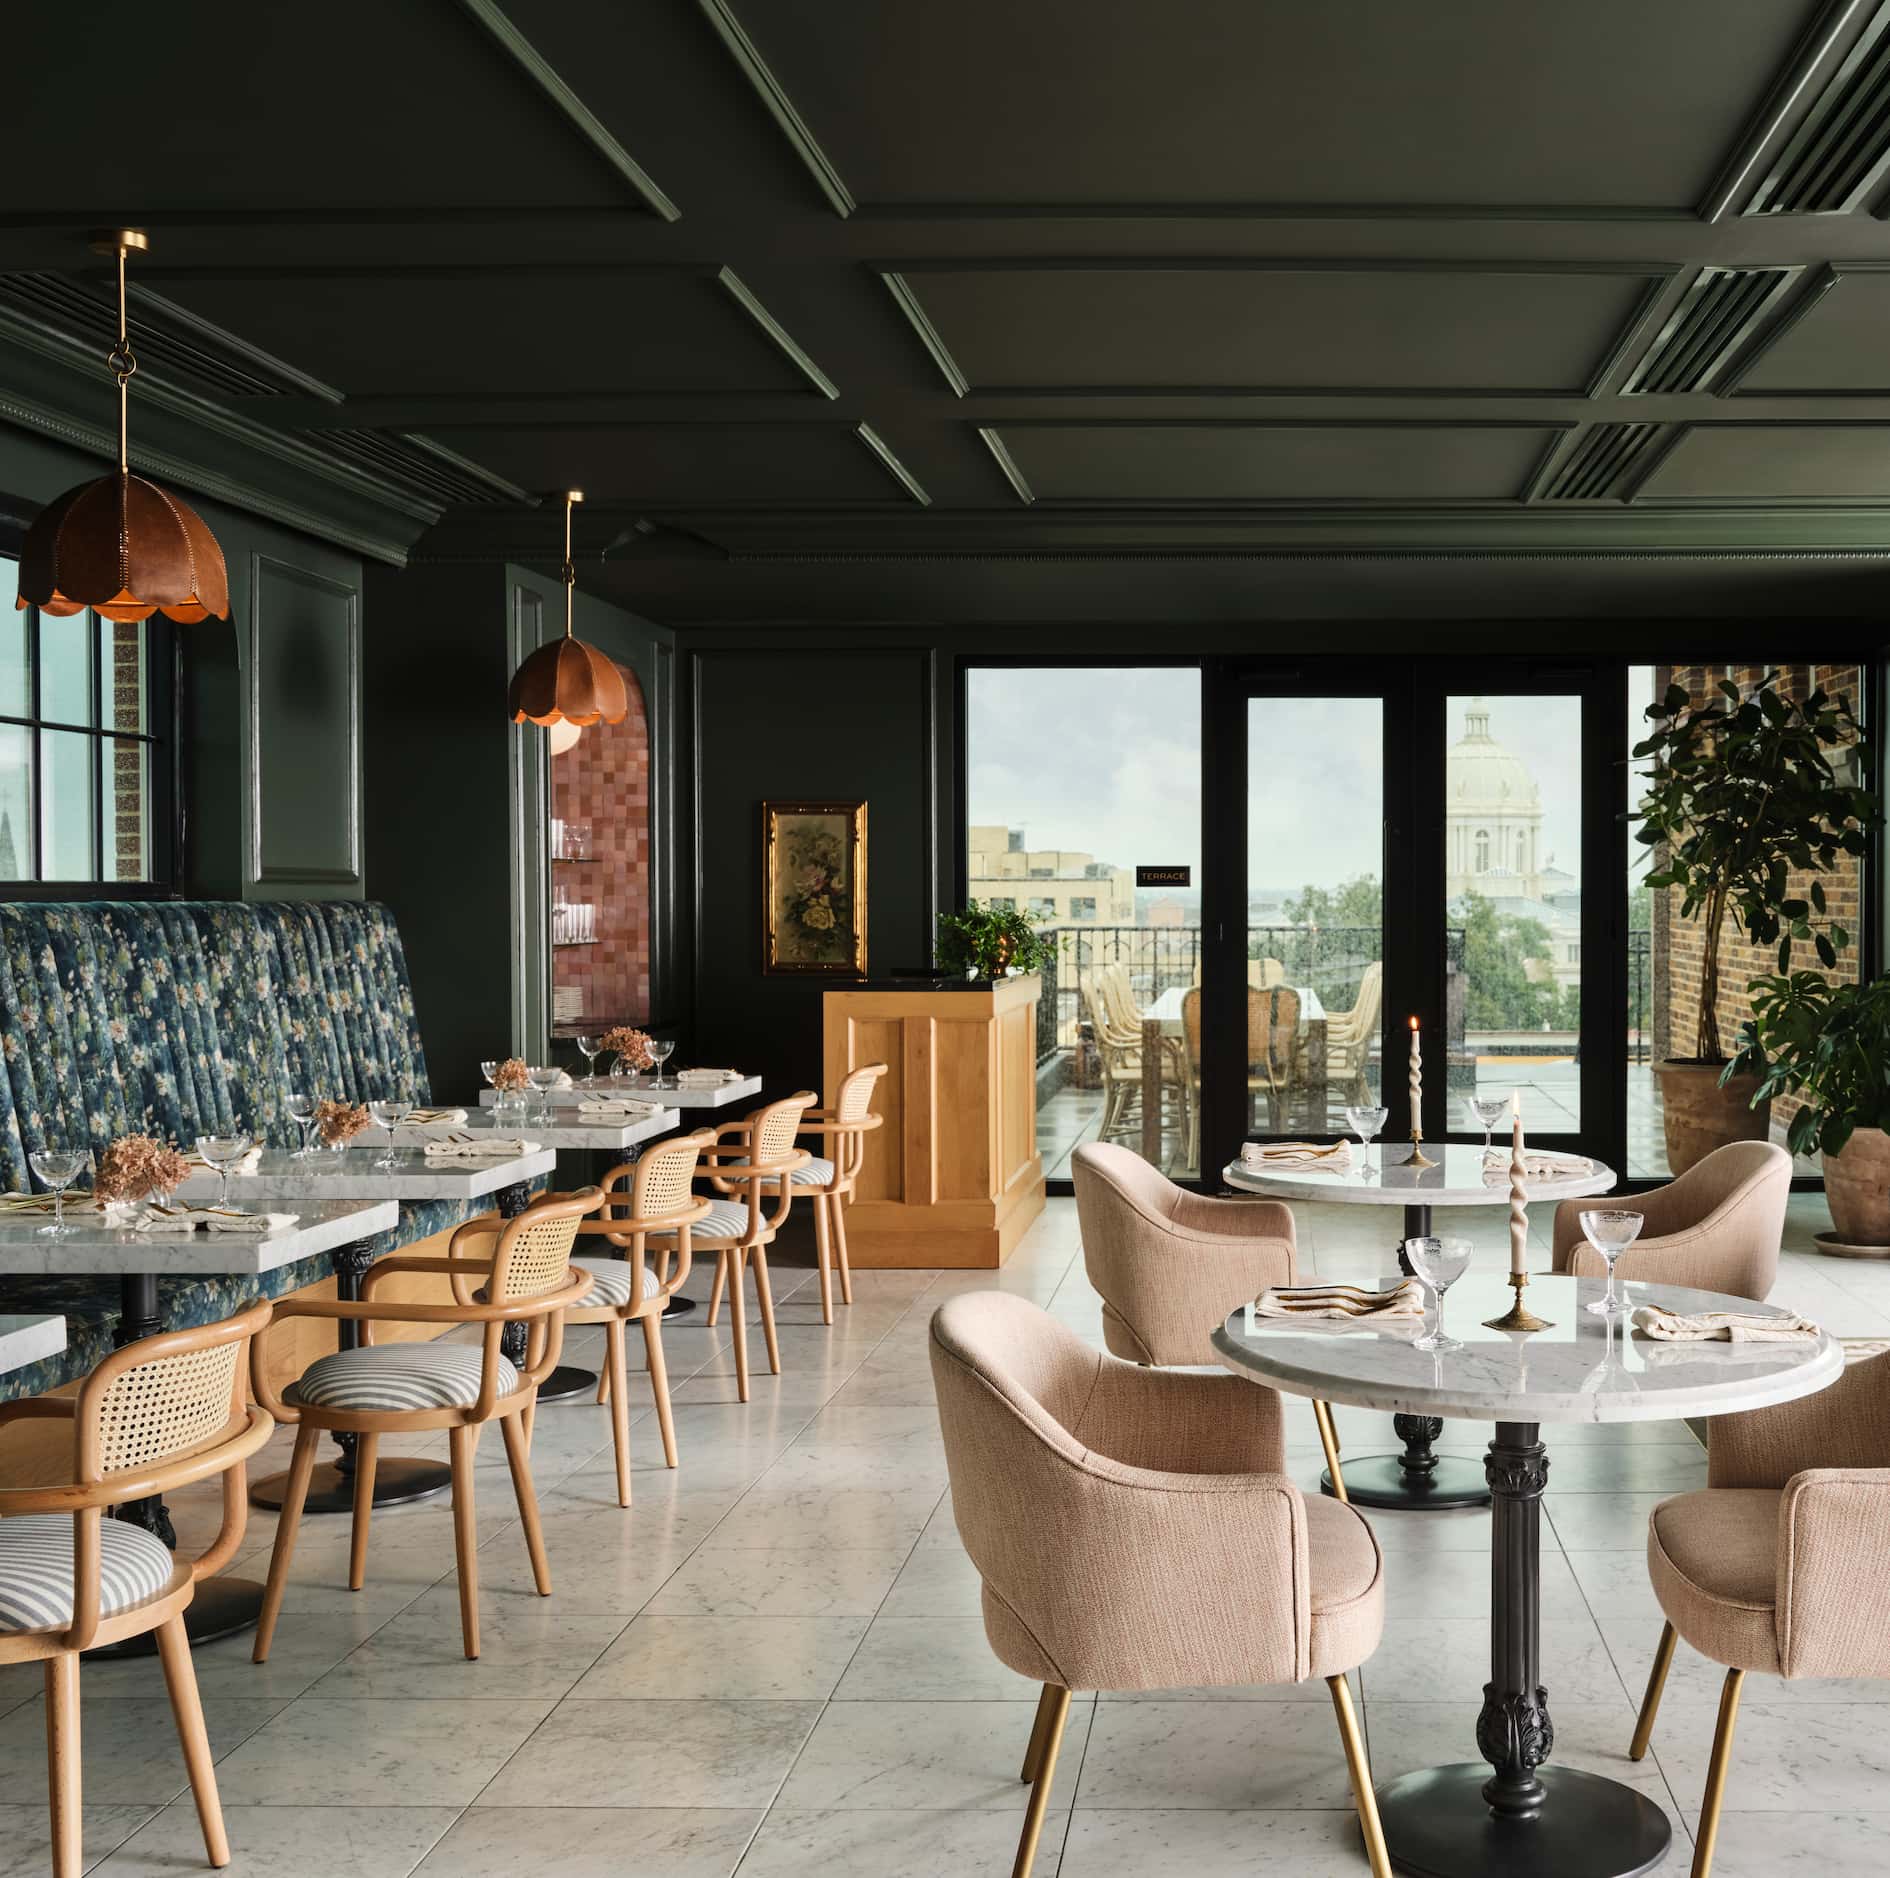 Warm design is a huge part of the allure at Hotel 1928 and its rooftop restaurant Bertie's...